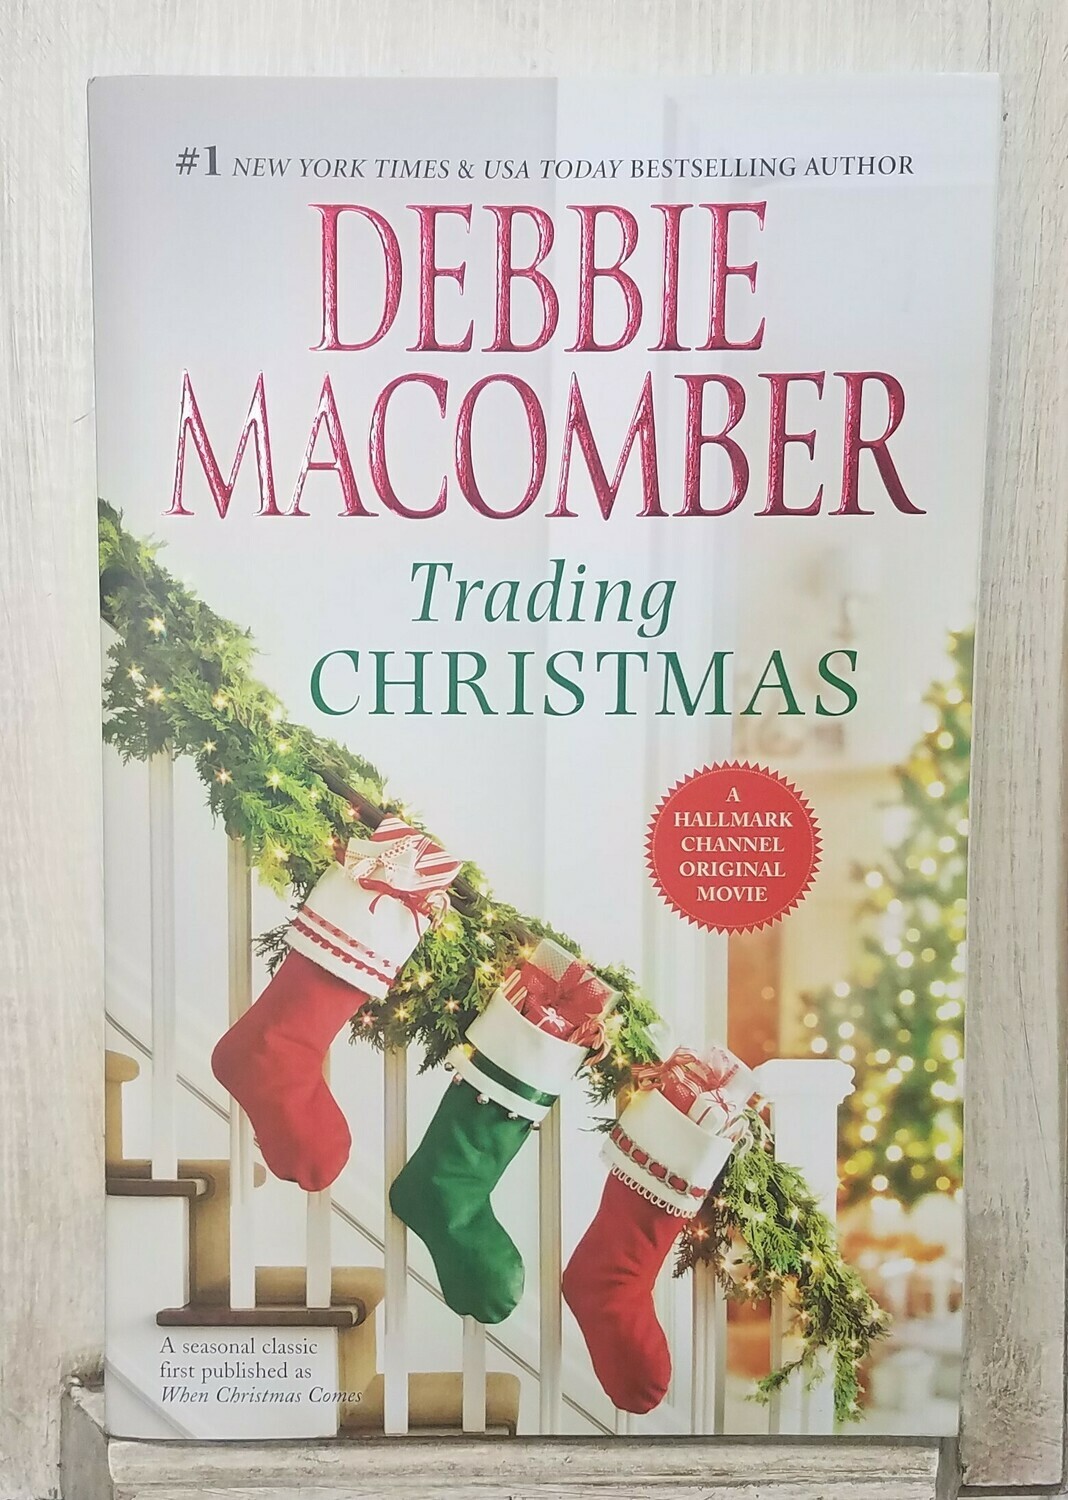 Trading Christmas by Debbie Macomber